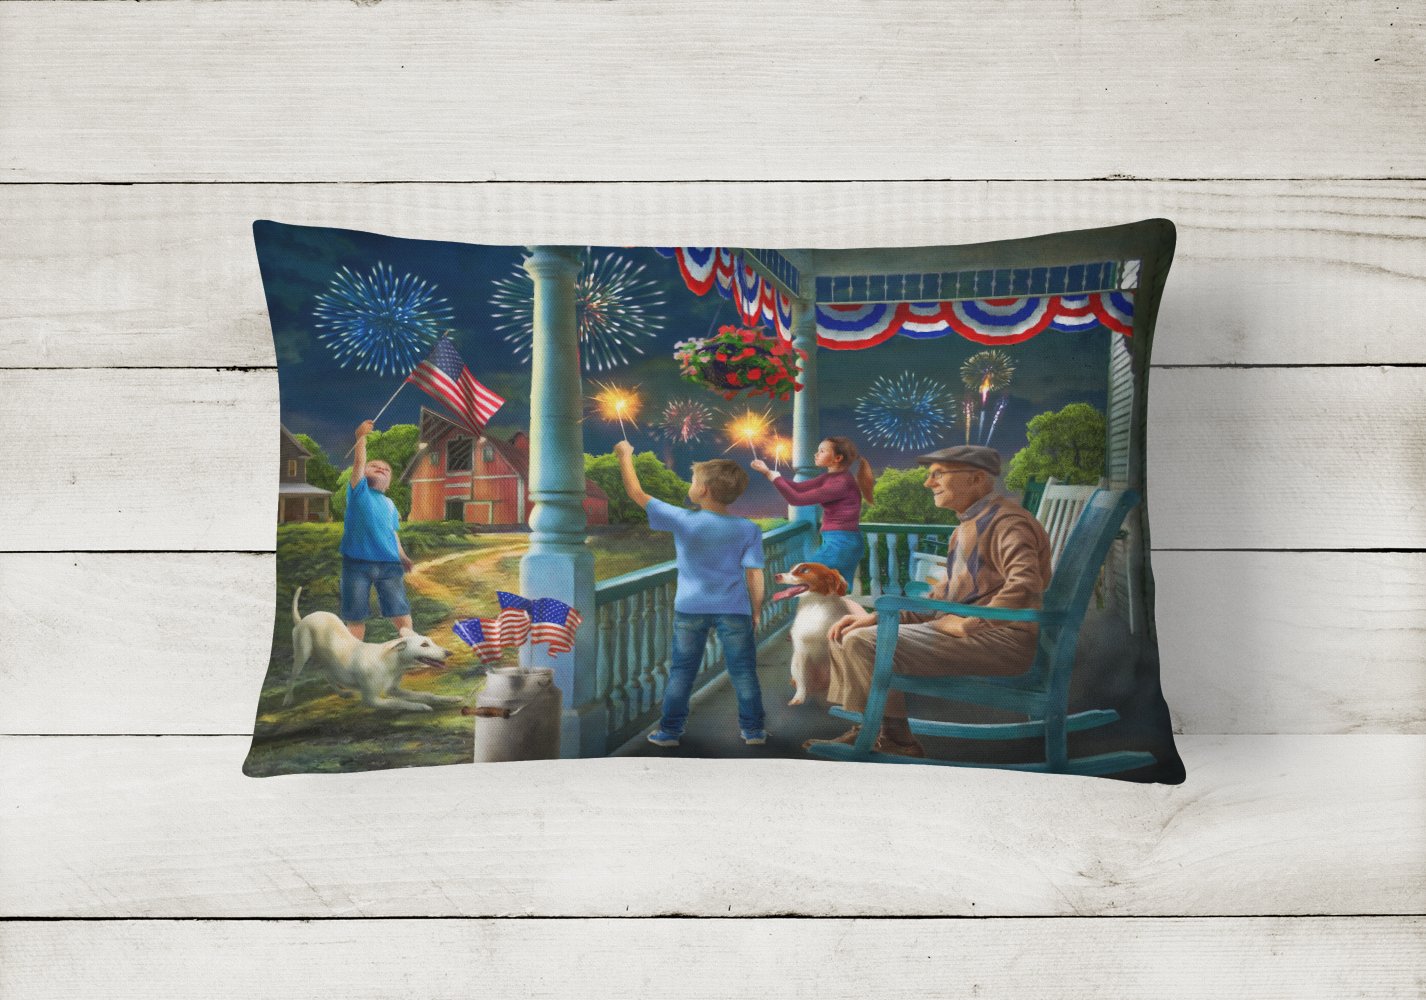 4th of July at Grandpa's USA Canvas Fabric Decorative Pillow PTW2073PW1216 by Caroline's Treasures